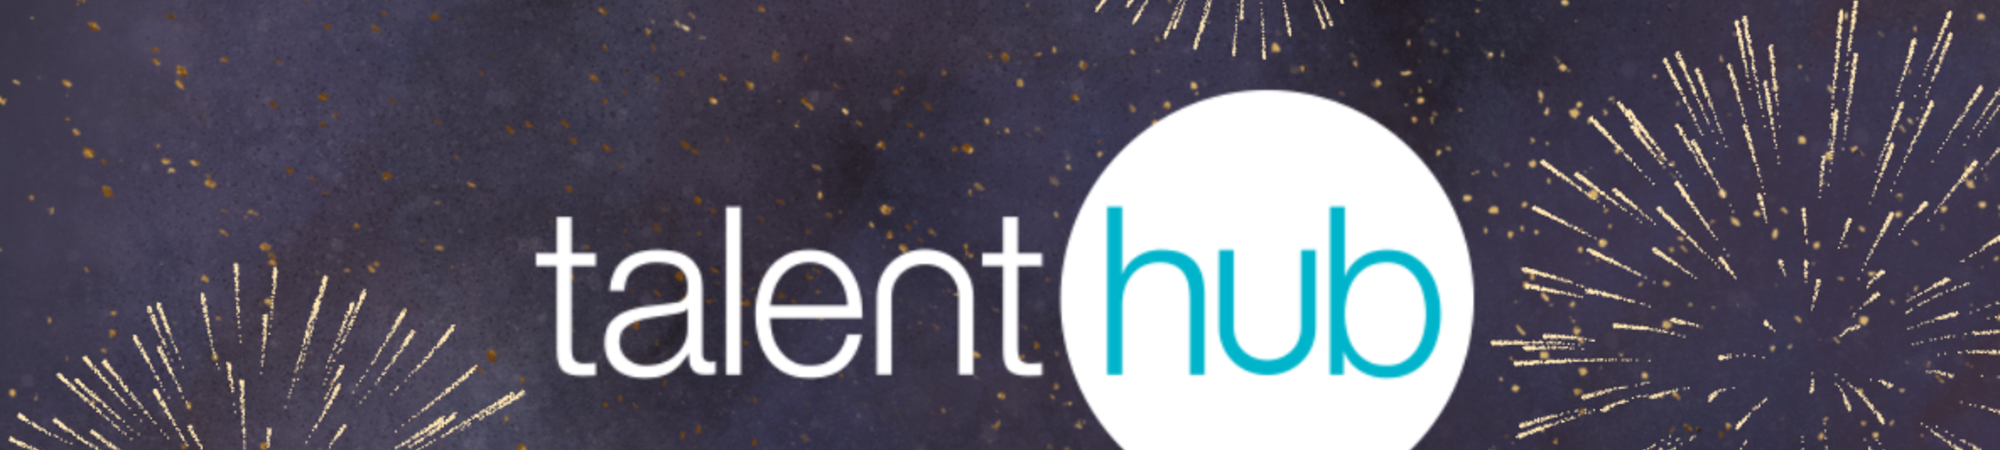 Talent Hub was launched 12 years ago today!